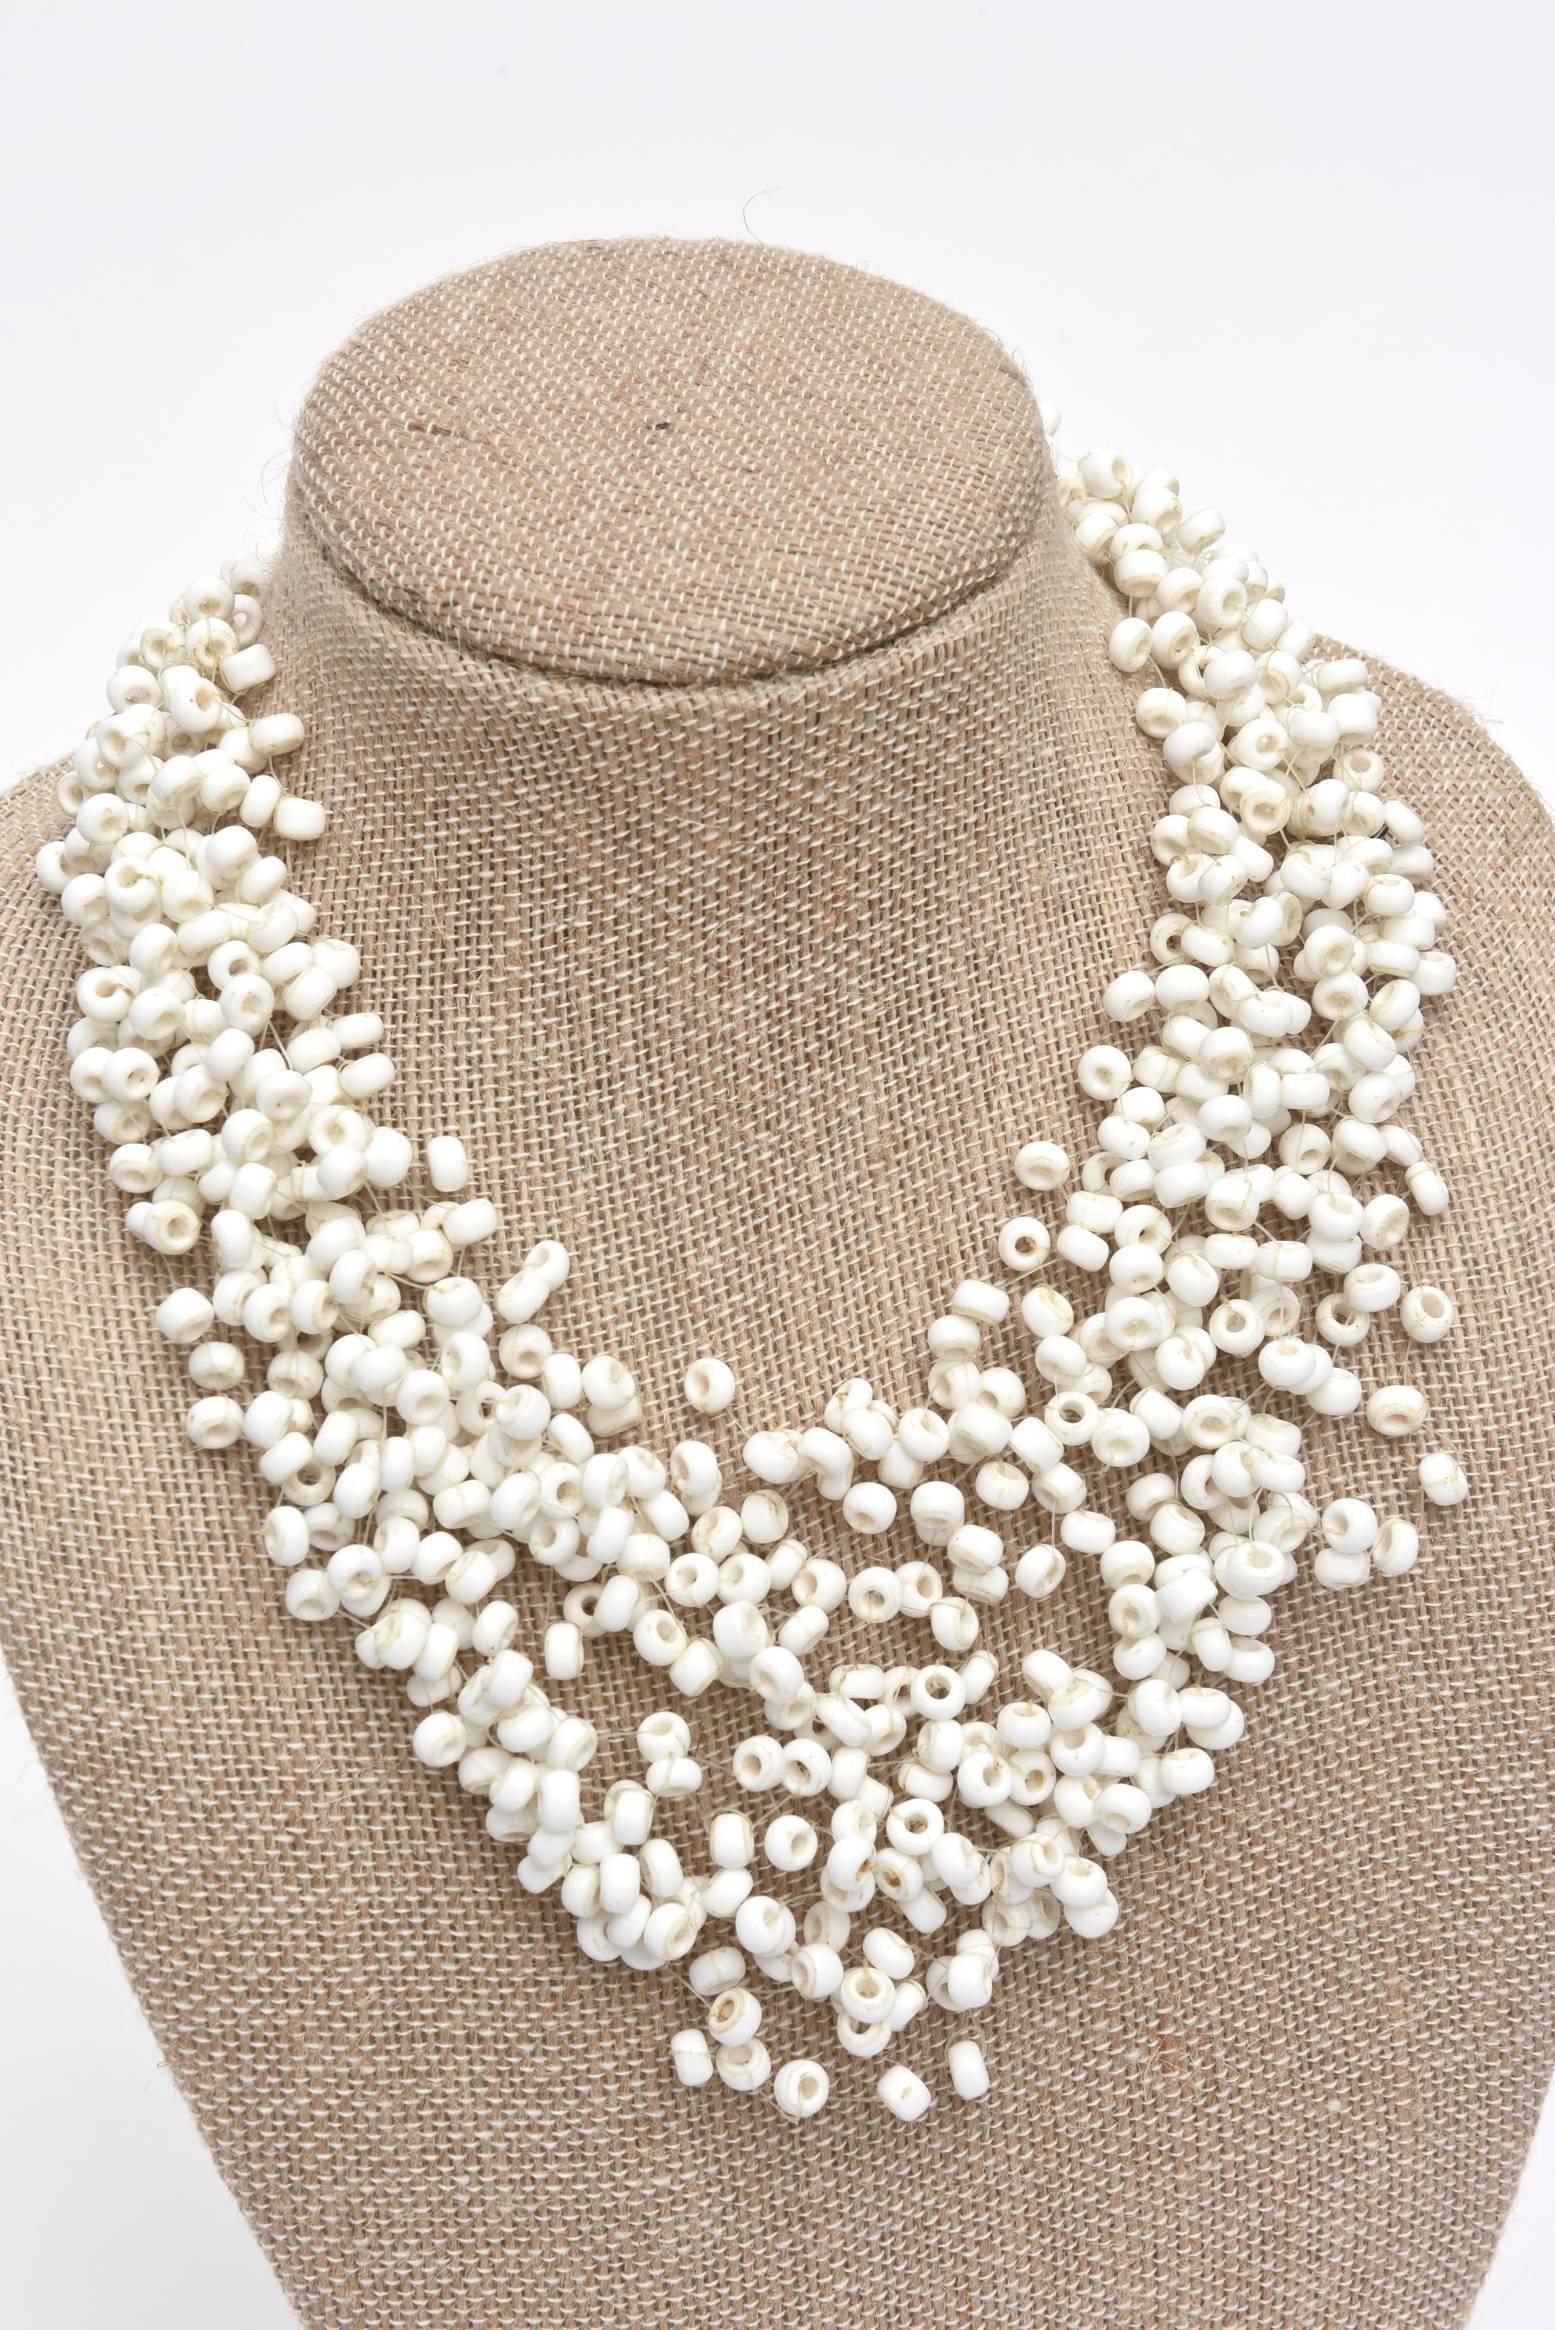 Vintage Langani Multi Strand White Beaded Necklace and Pair Of Clip On Earrings In Good Condition For Sale In North Miami, FL